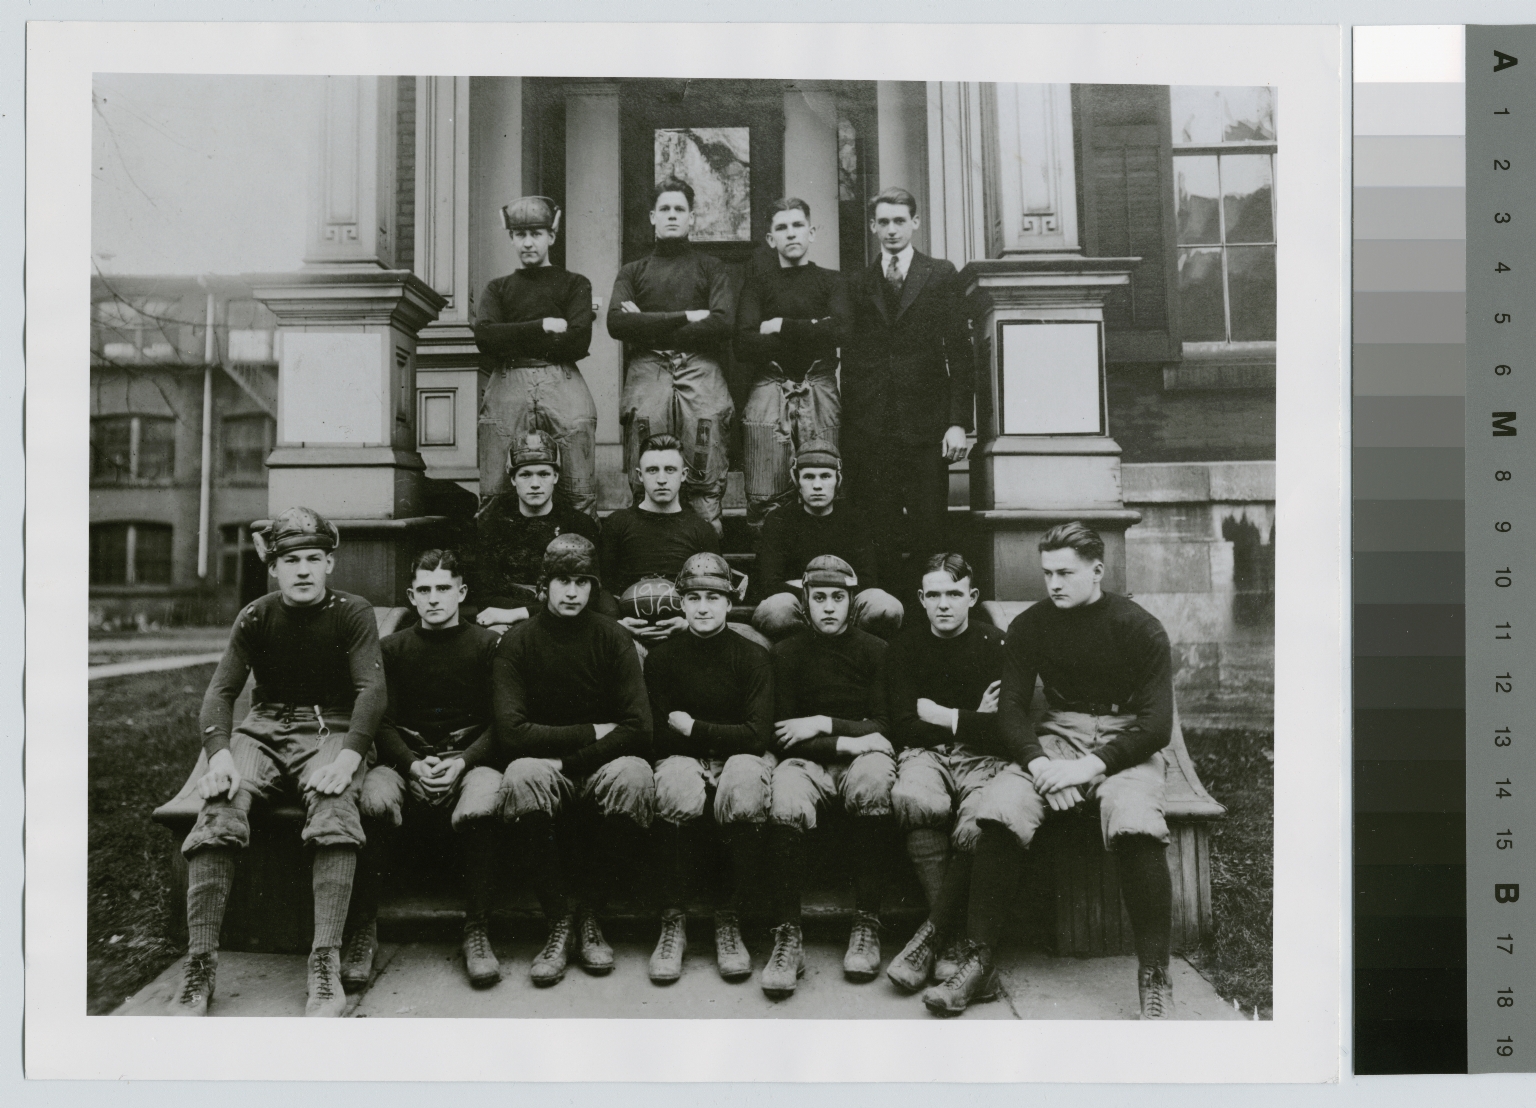 Student activities, group portrait of the Rochester Athenaeum and Mechanics Institute football team, 1920